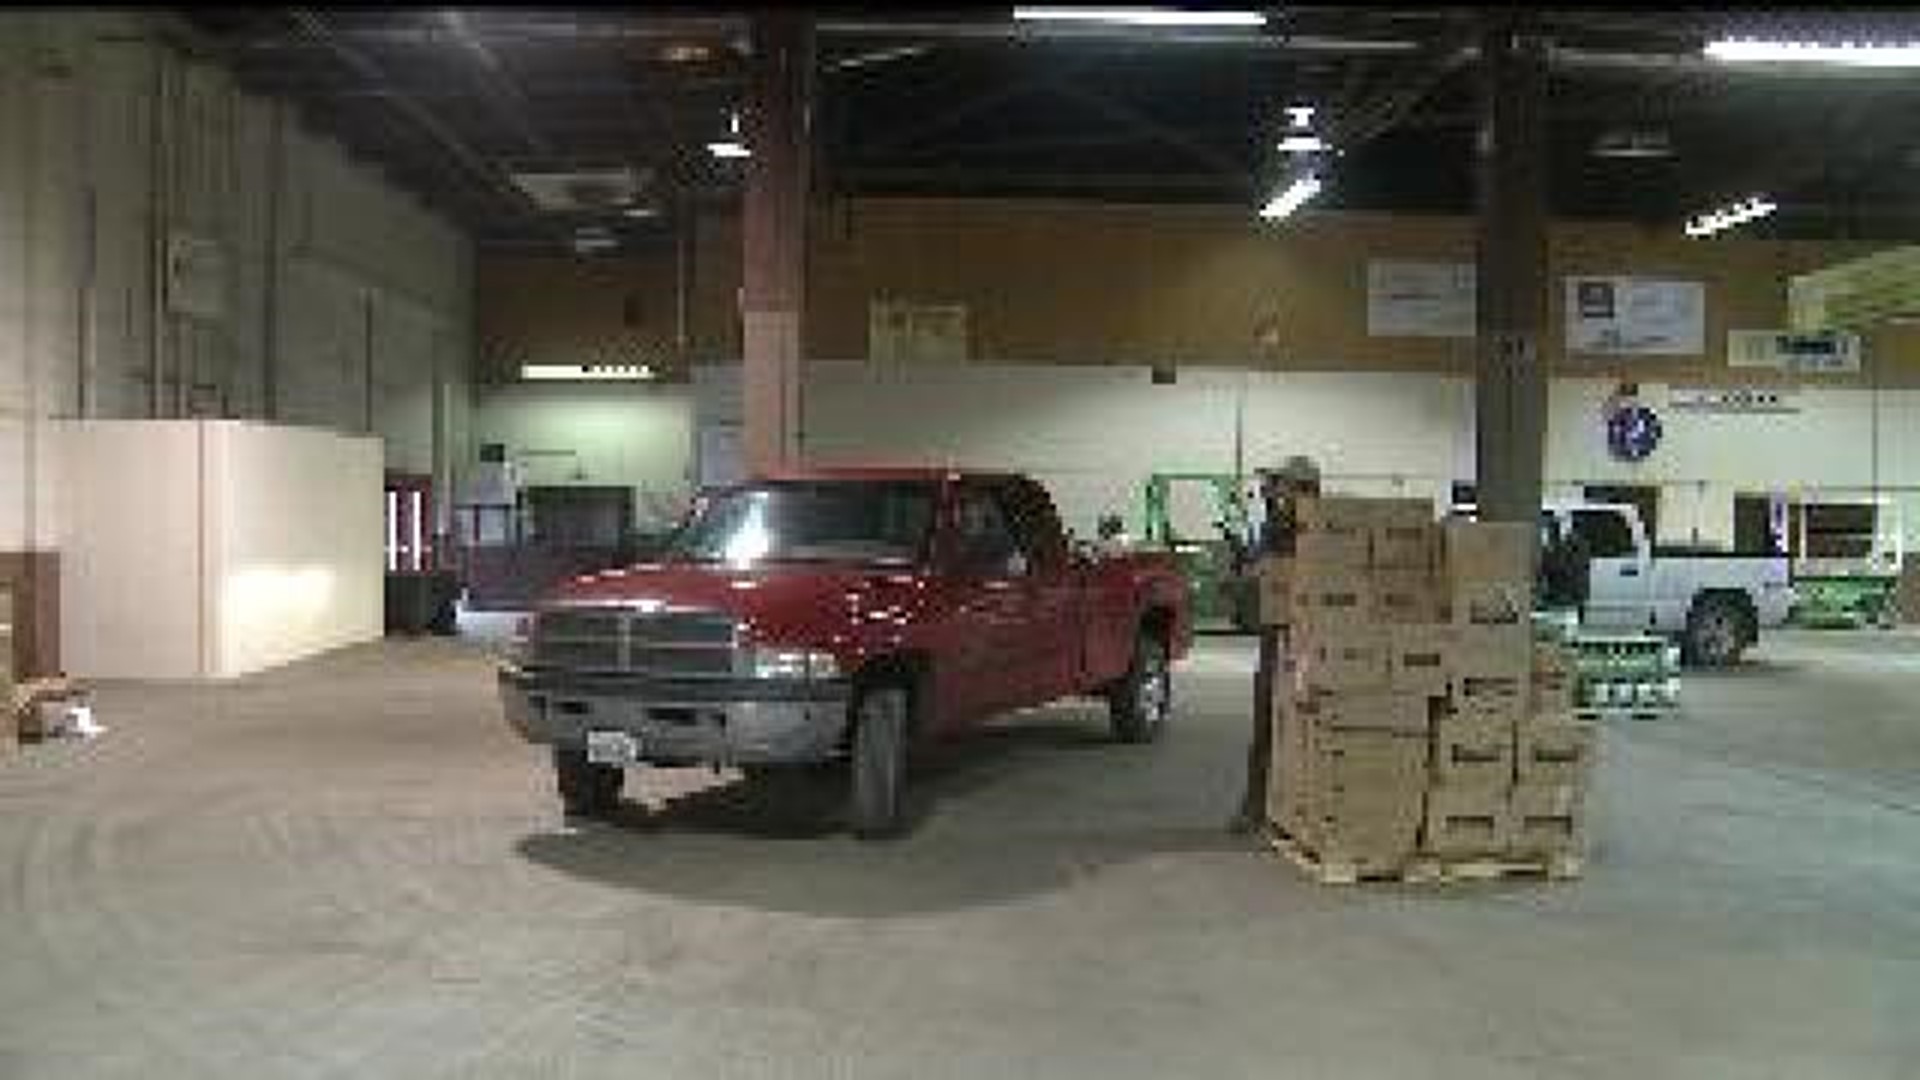 Food donations growing in the QC area